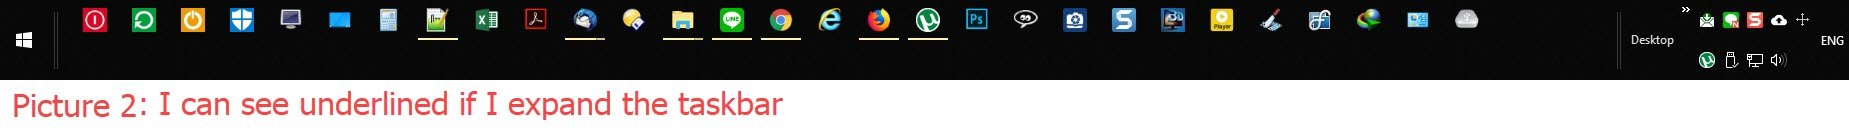 Underlined icon in the default taskbar size disappear (picture 1) and reappear 10e62550-70bf-4590-a1c5-833c02d66c7e?upload=true.jpg